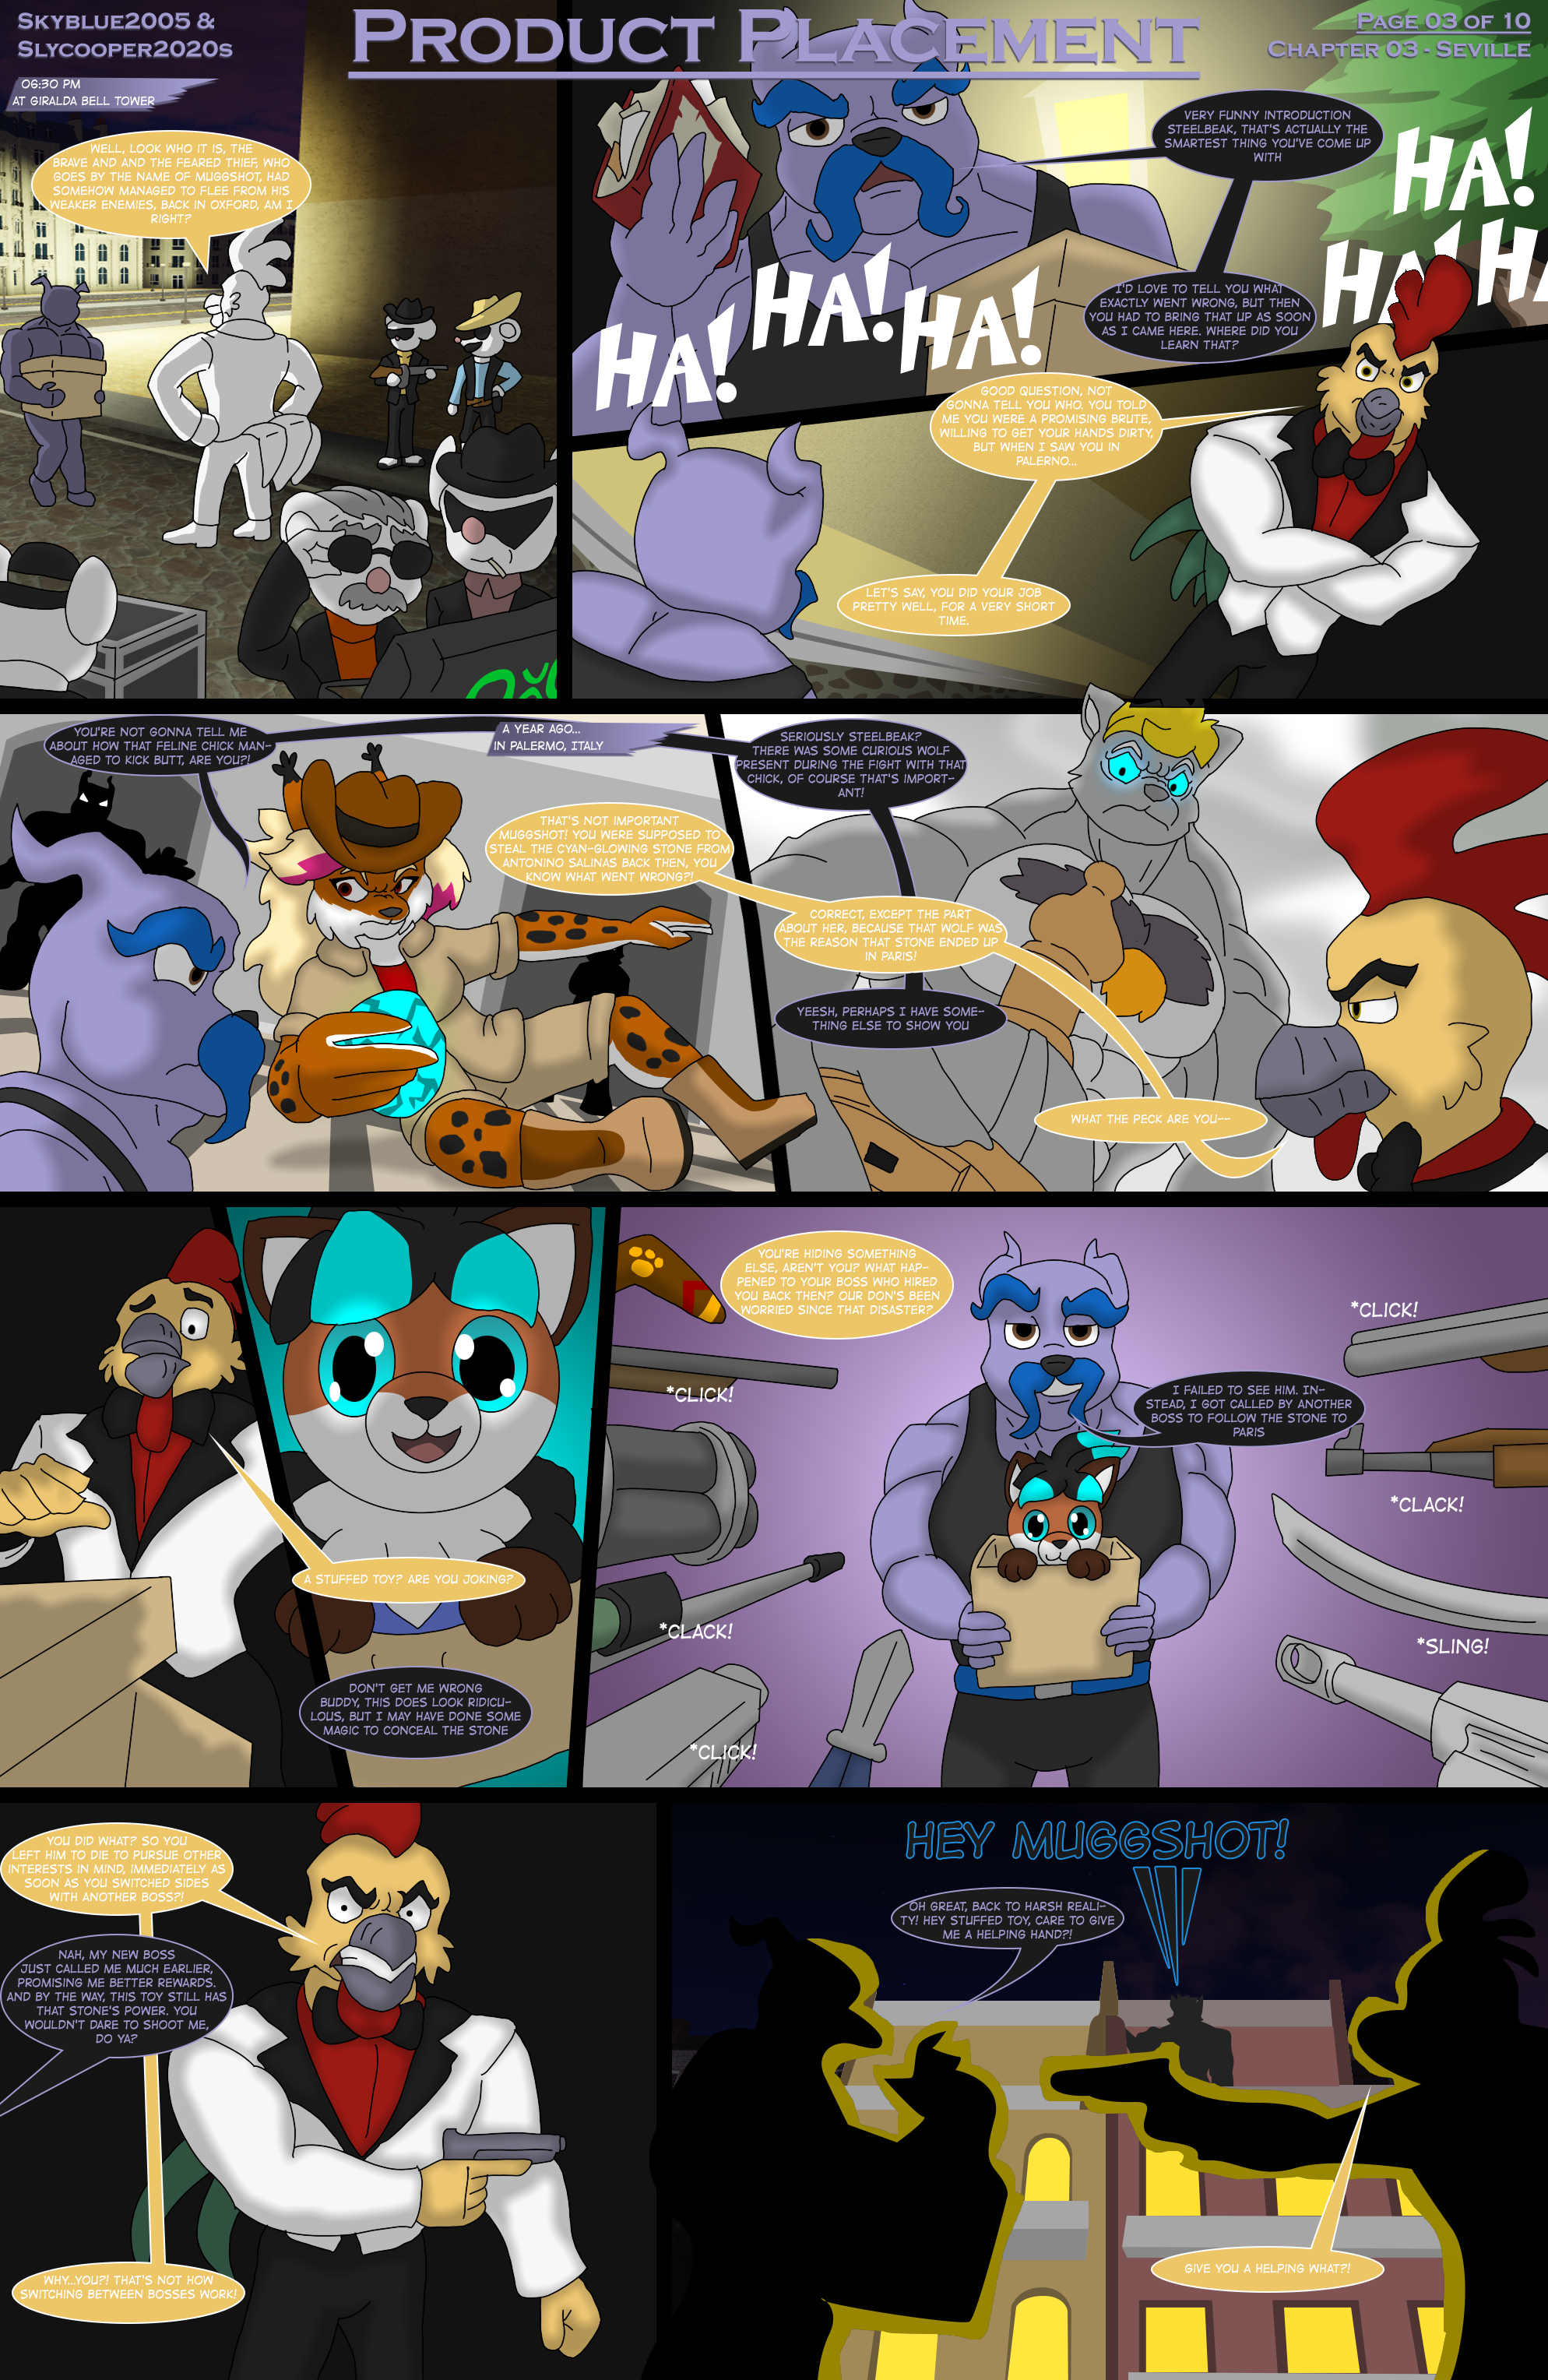 https://d.furaffinity.net/art/skyblue2005/1653695942/1653695871.skyblue2005_sly_cooper_seville_page_03.png